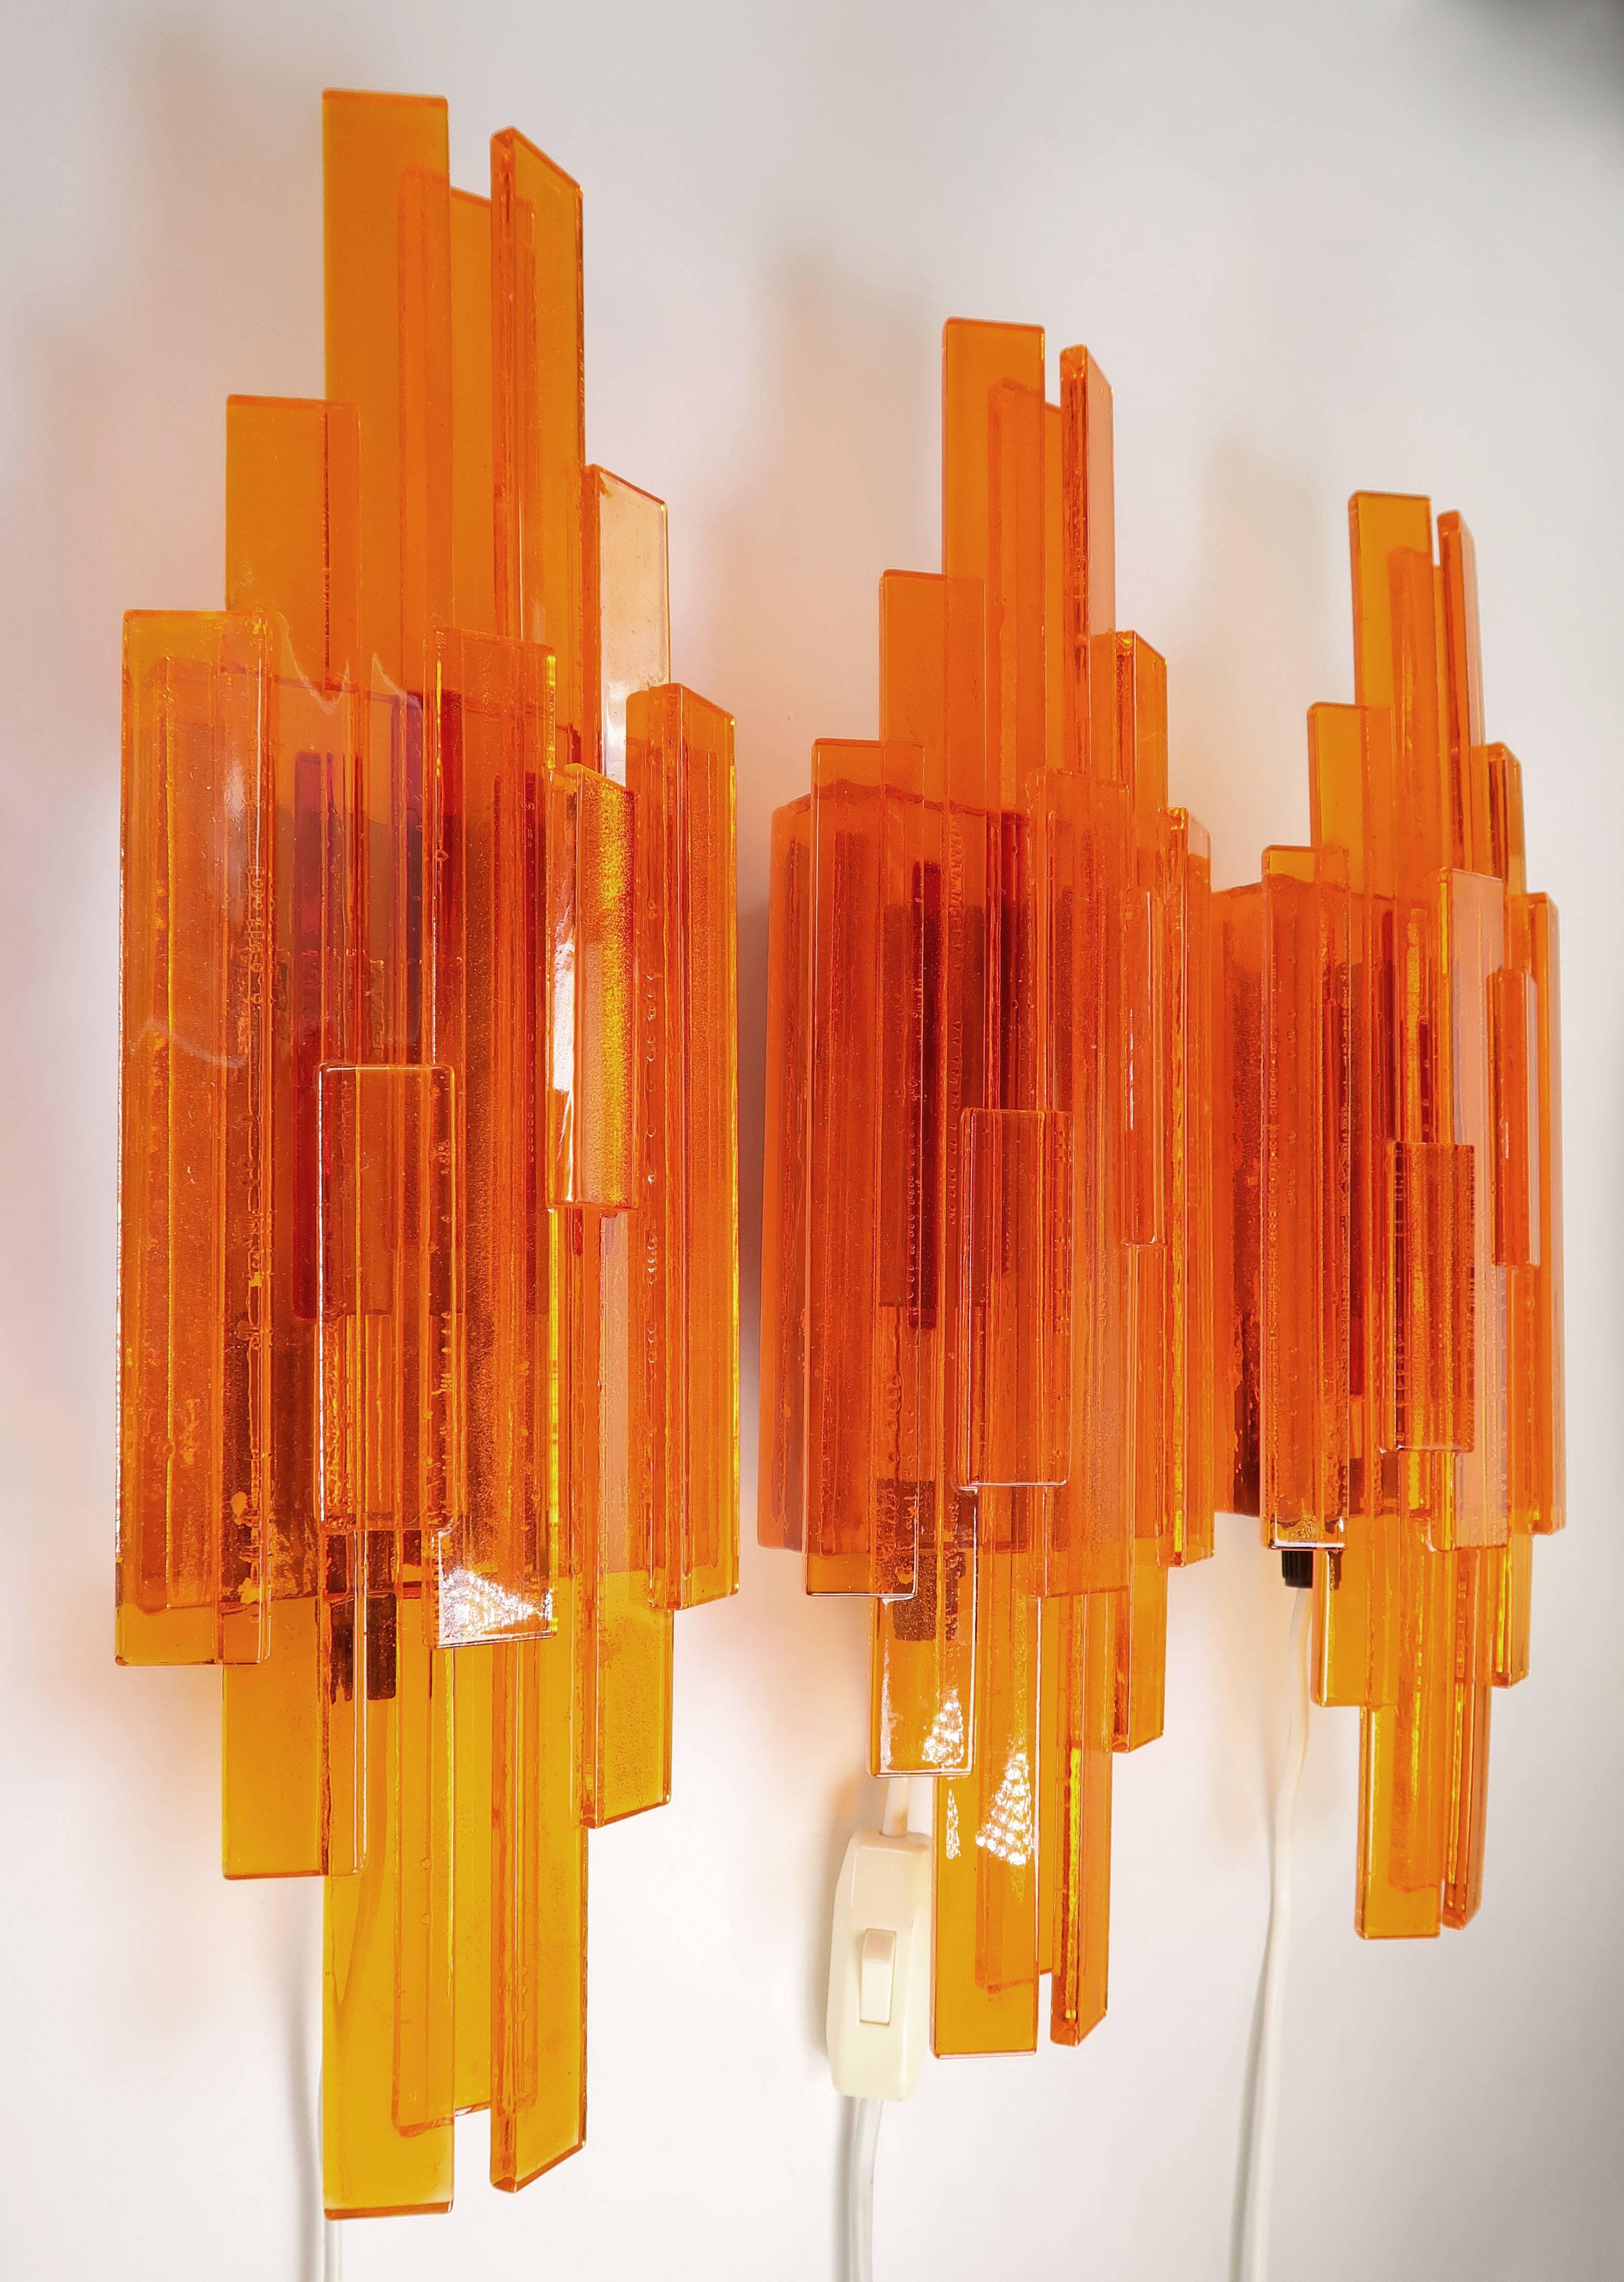 Set of three handmade Space Age wall lights of layered rectangular sticks of yellow and orange acrylic creating a sculptural triangular shape. Designed in 1975 by Danish flight engineer and designer Claus Bolby. Each item is handmade, and Bolby